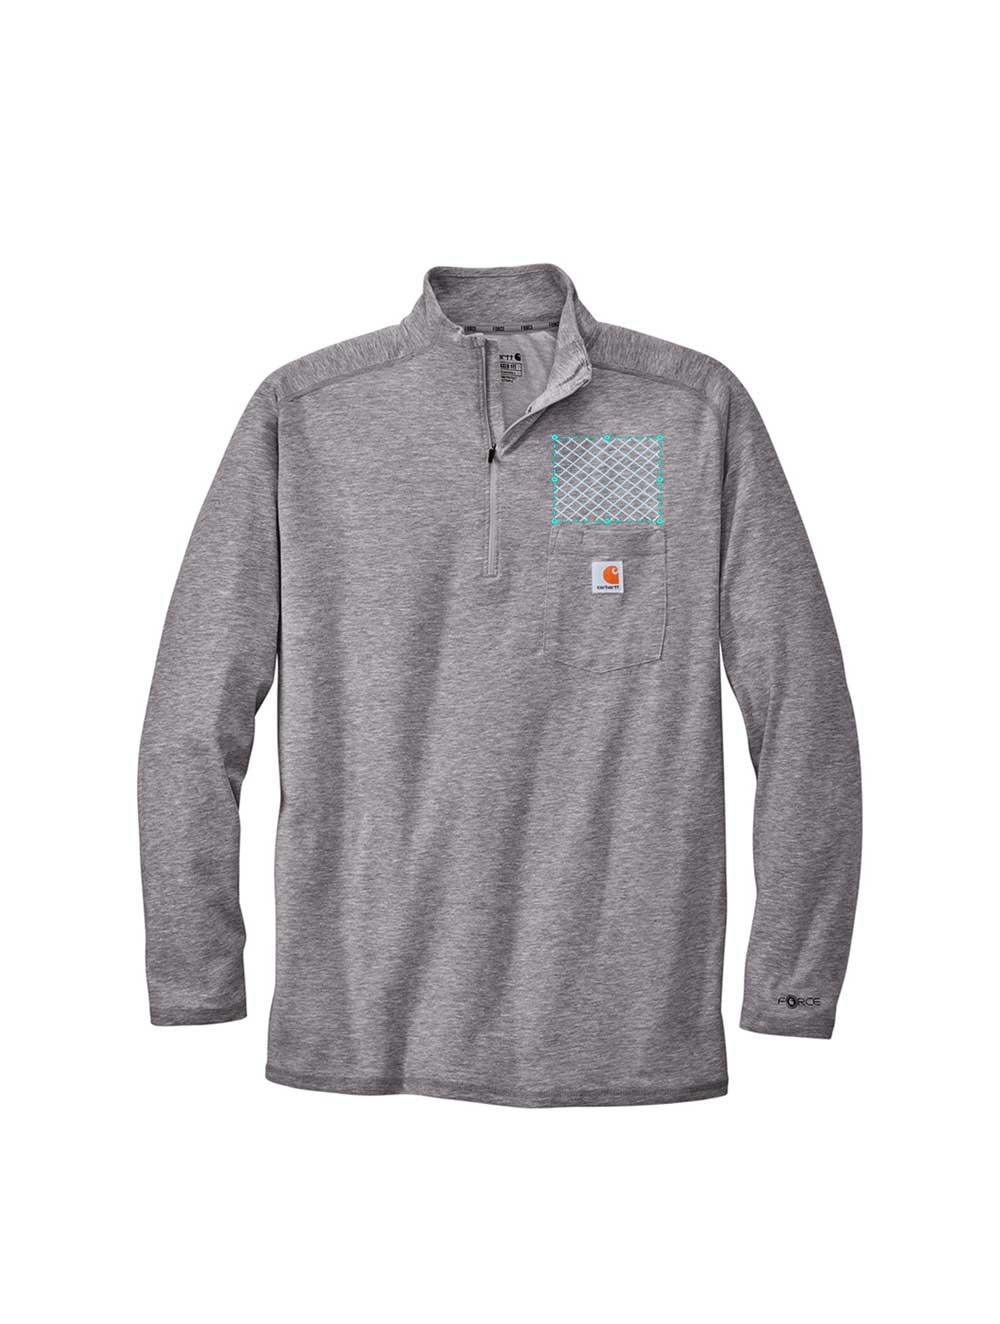 Embroidered Carhartt Force® 1/4-Zip Long Sleeve T-Shirt - Constantly Create Shop